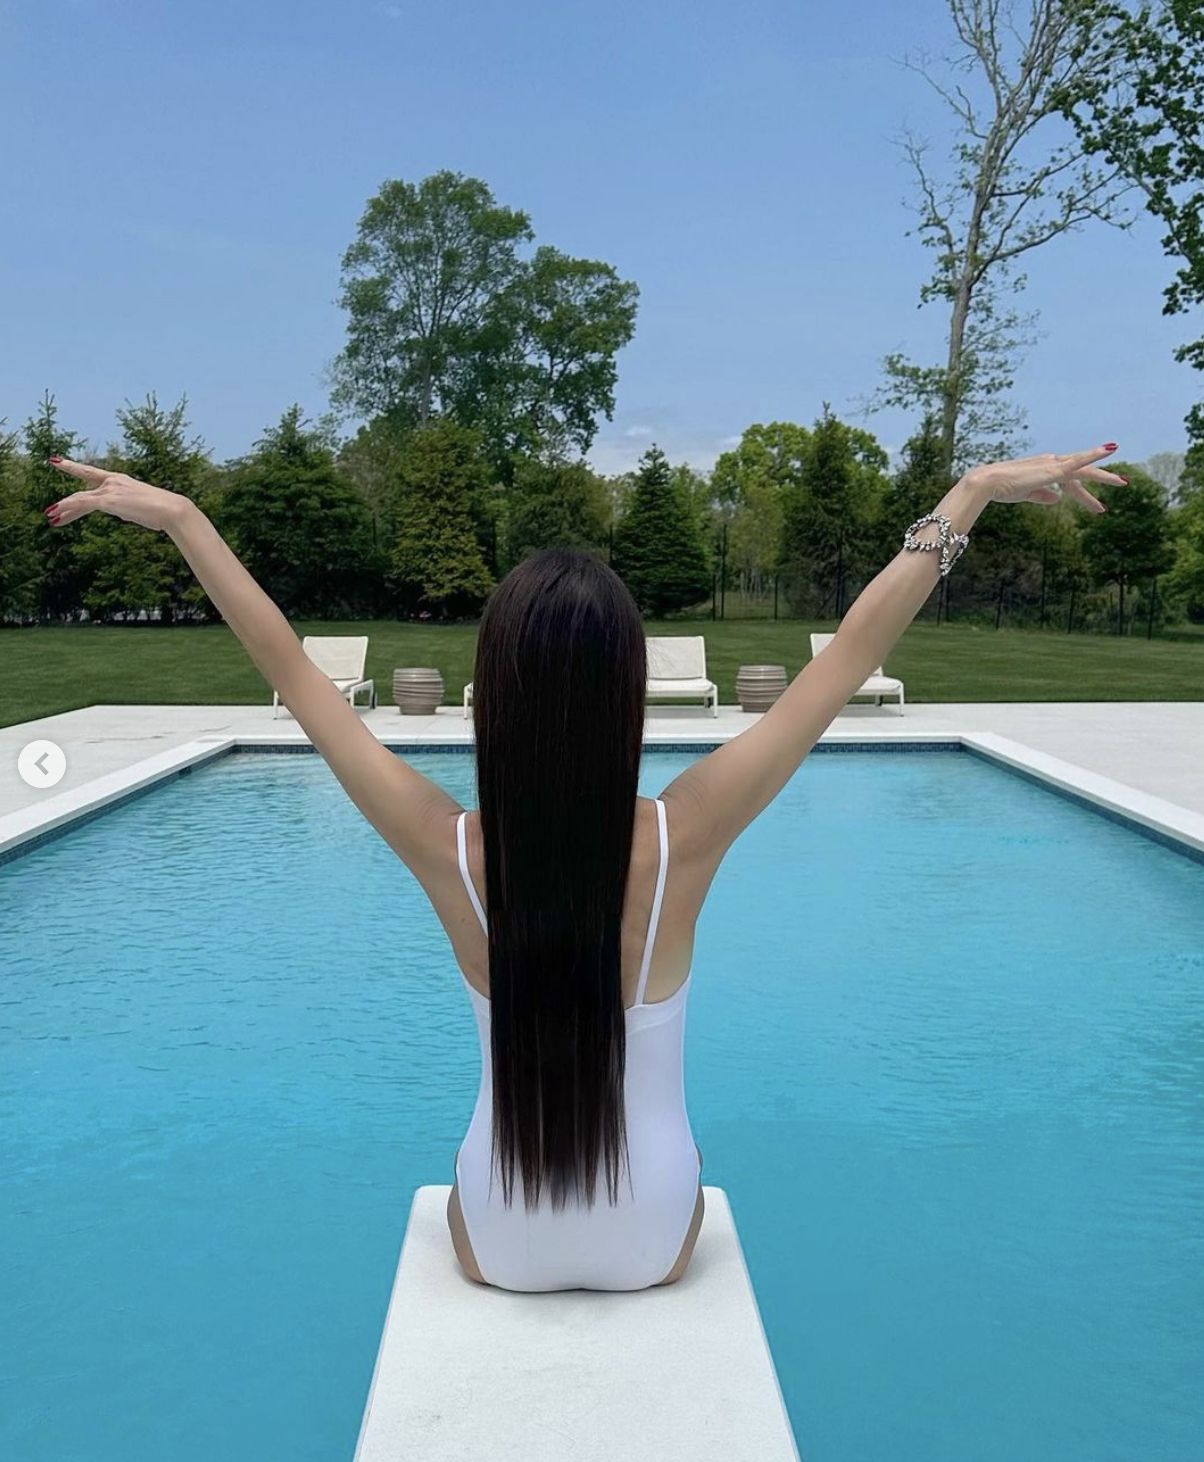 74-year-old Vera Wang flaunts her ageless body in a swimsuit